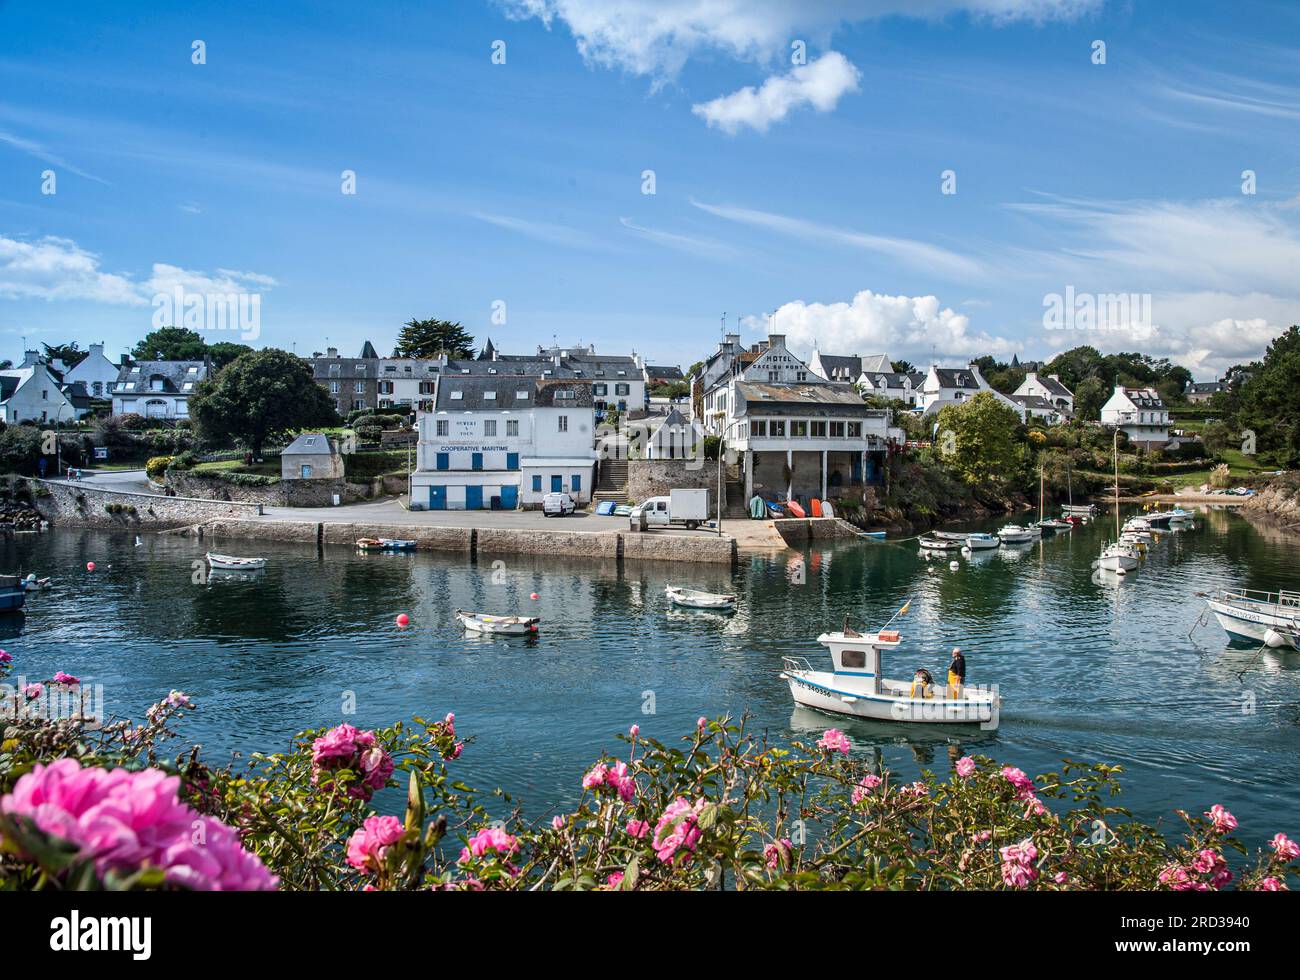 BRITTANY FISHING QUAY FLOWERS DAY BOAT Temperate landscape with fishing harbour and fishing boats at Doëlan Finistere Brittany France Stock Photo